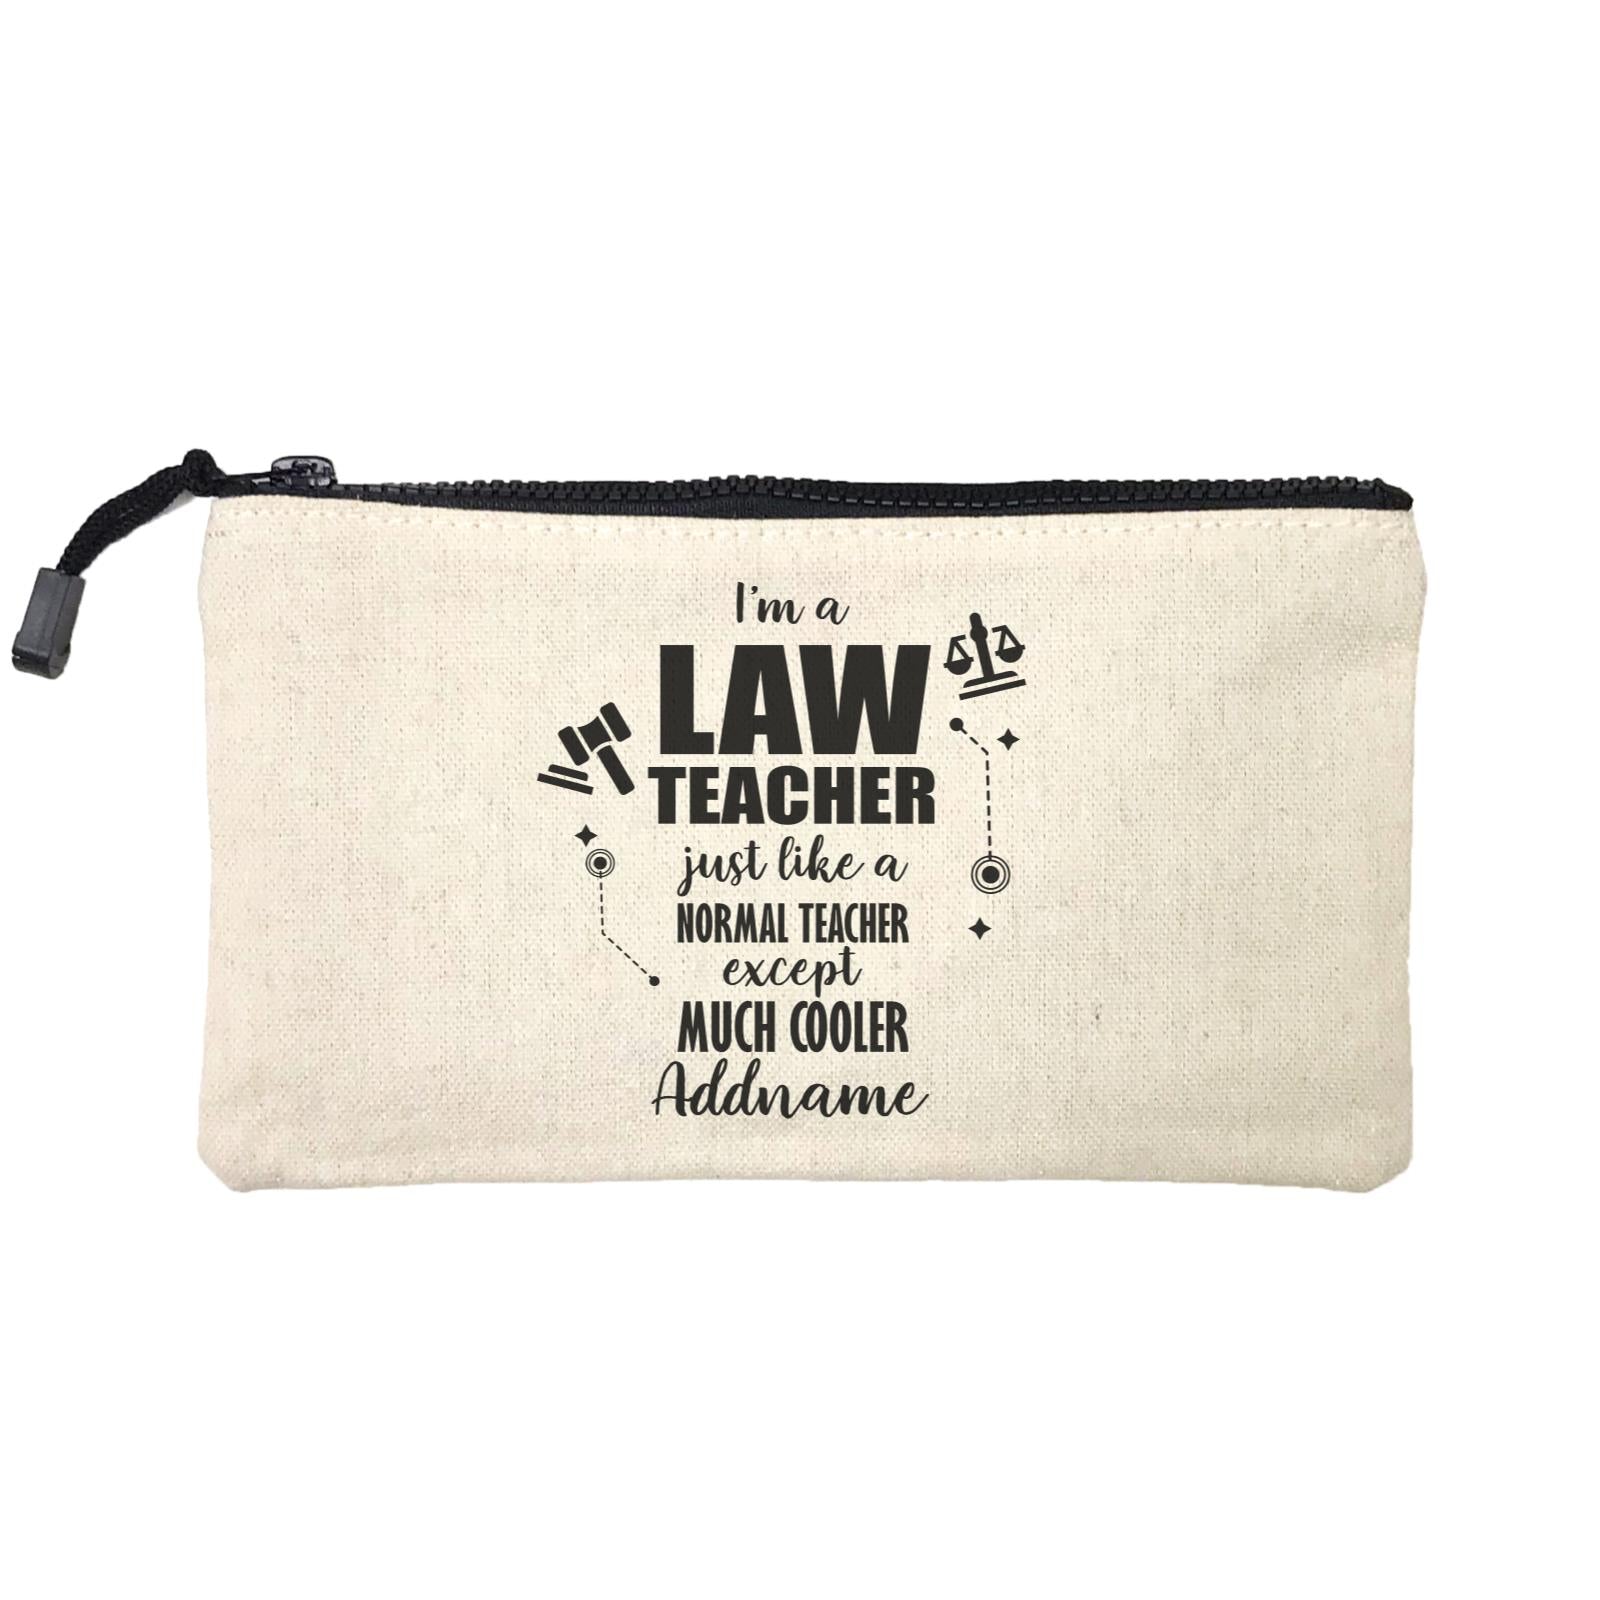 Subject Teachers I'm A Law Teacher Addname Mini Accessories Stationery Pouch